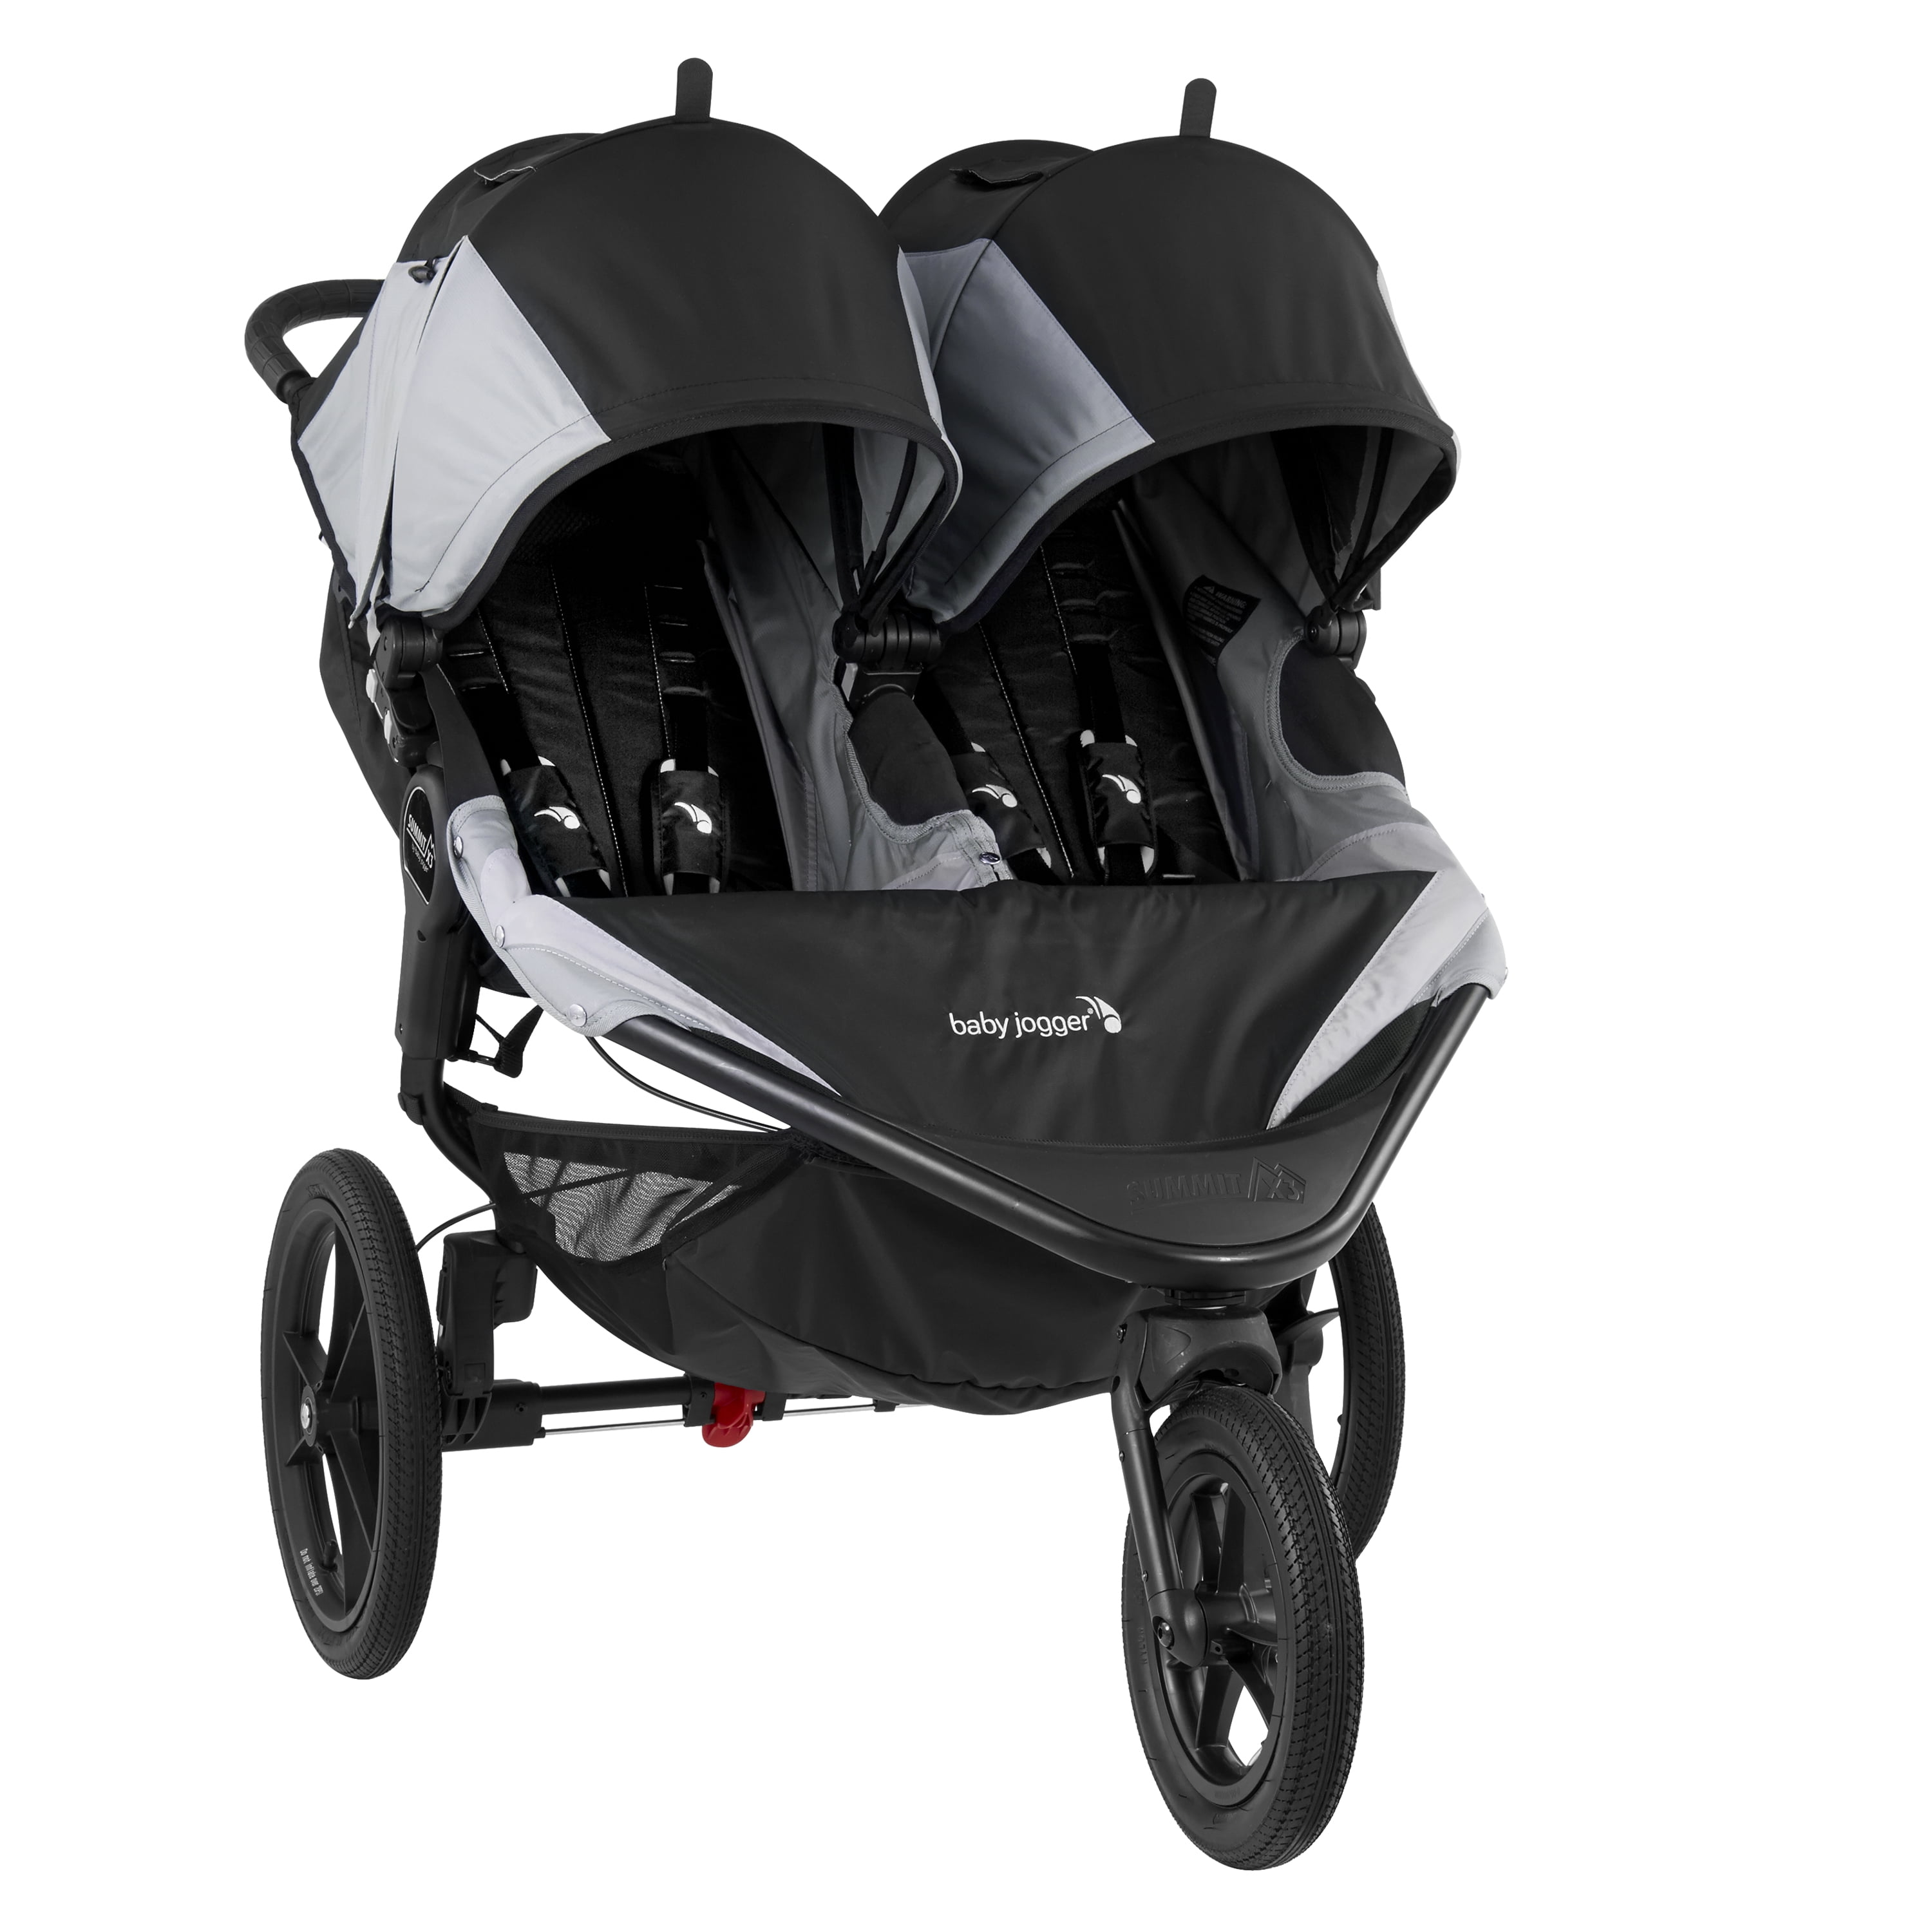 Haiku Reporter Scully Baby Jogger Summit X3 Double Jogging Stroller, Black and Gray - Walmart.com